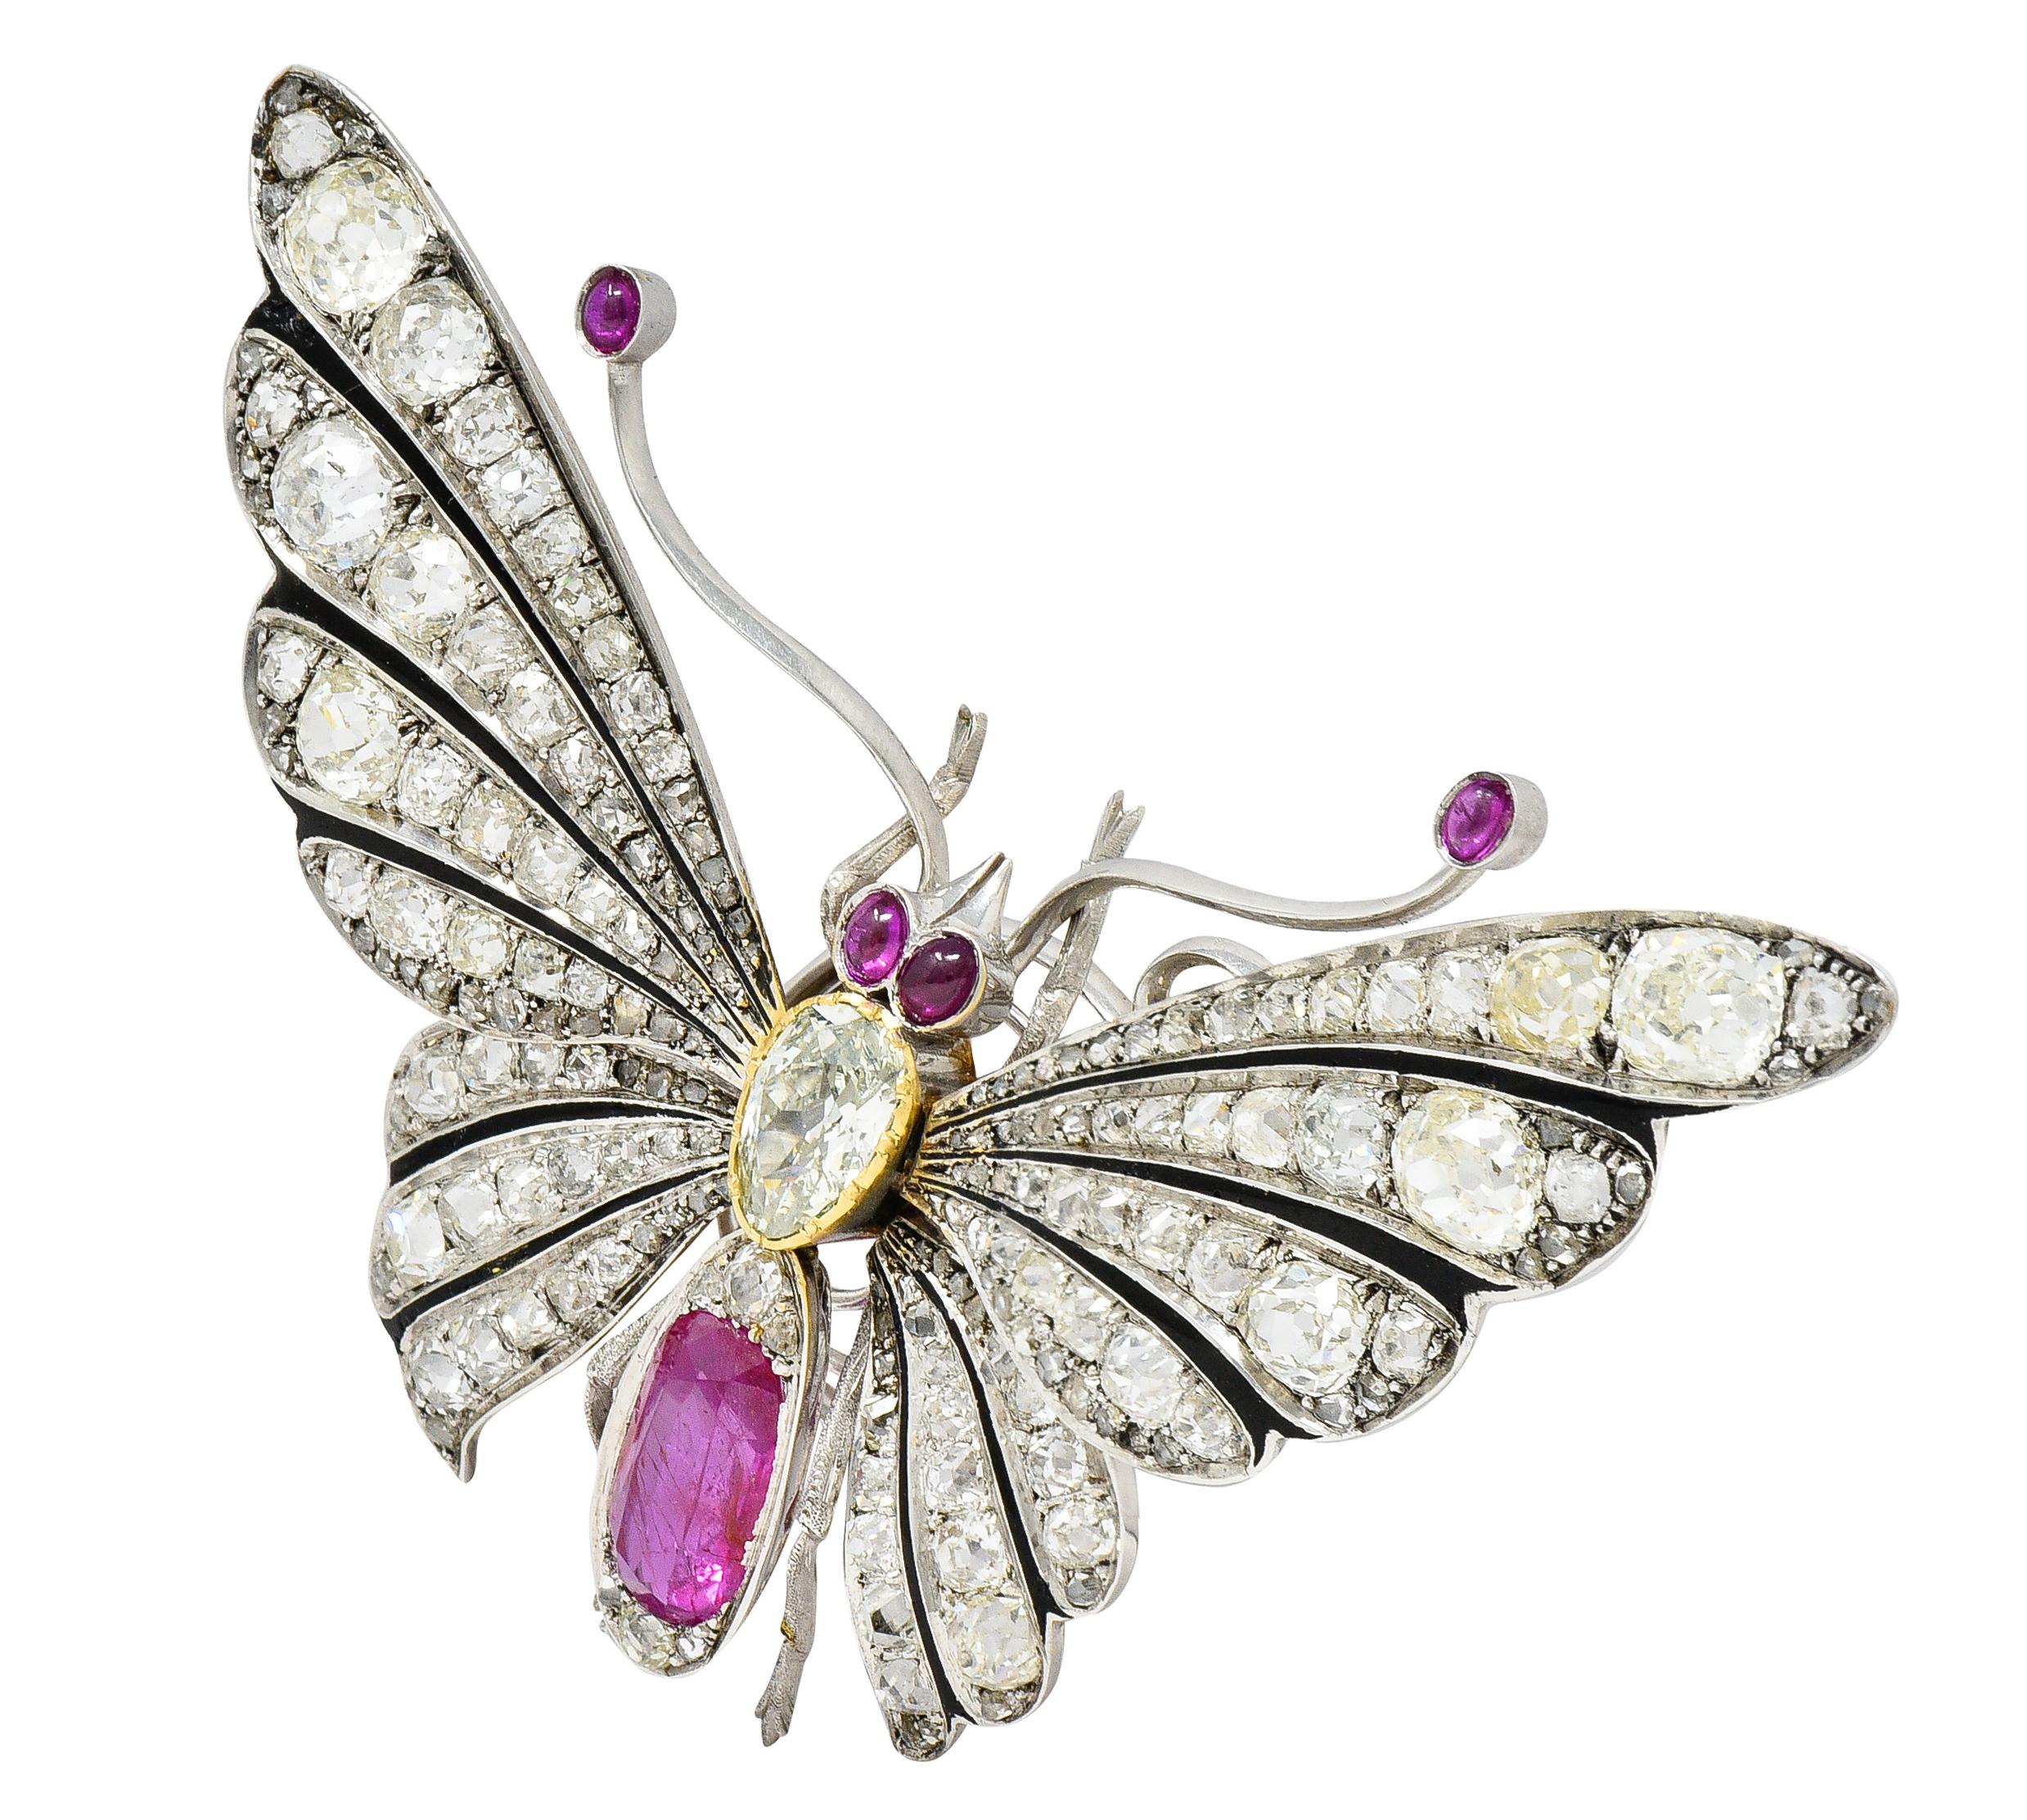 Brooch is designed as a substantial butterfly with spread wings and positioned on a coil for a 